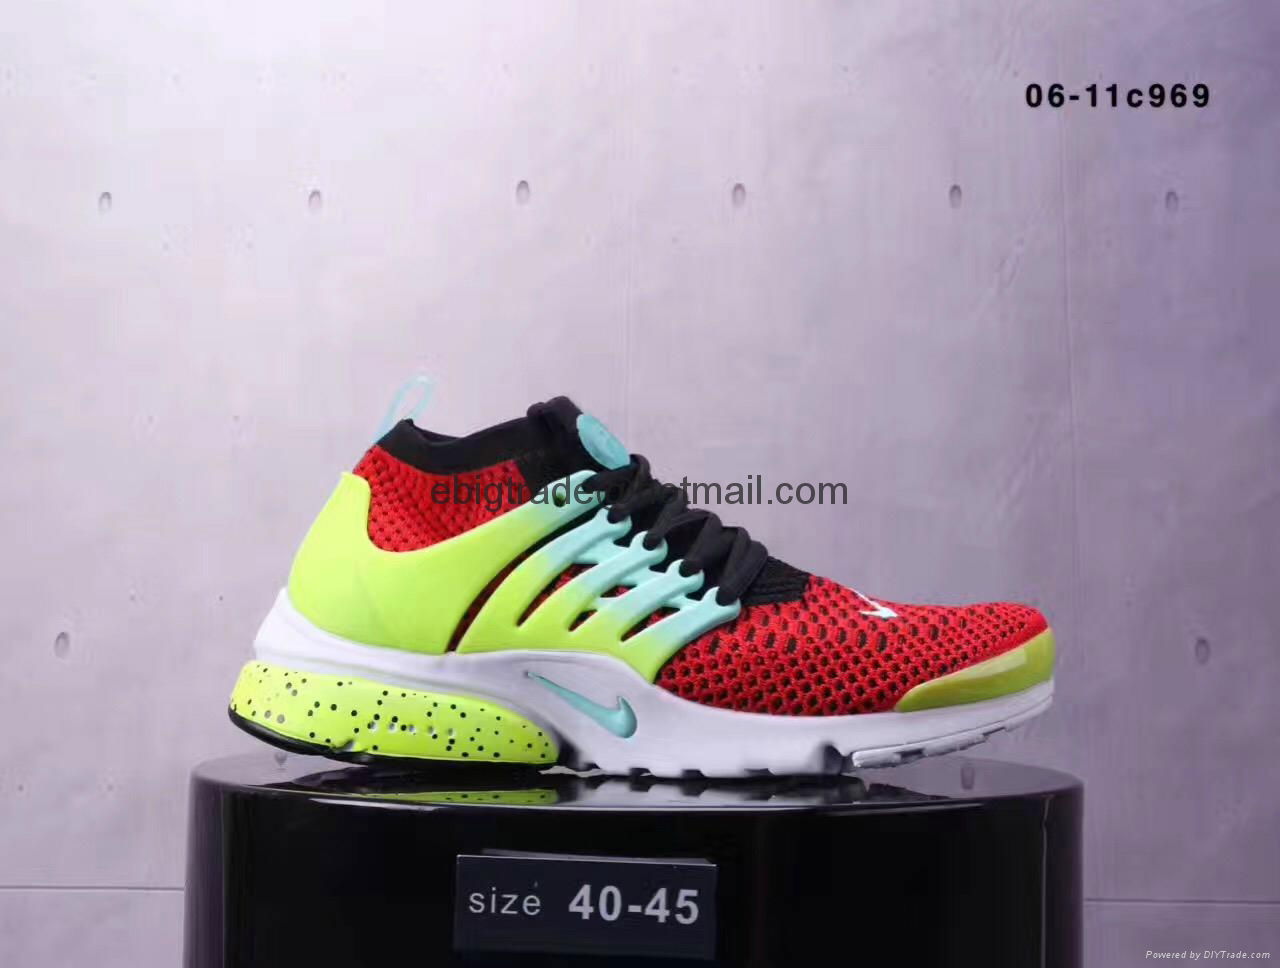 Cheap      Air Presto Flyknit Ultra      AIR SHOES      RUNNING SHOES ON SALE  5